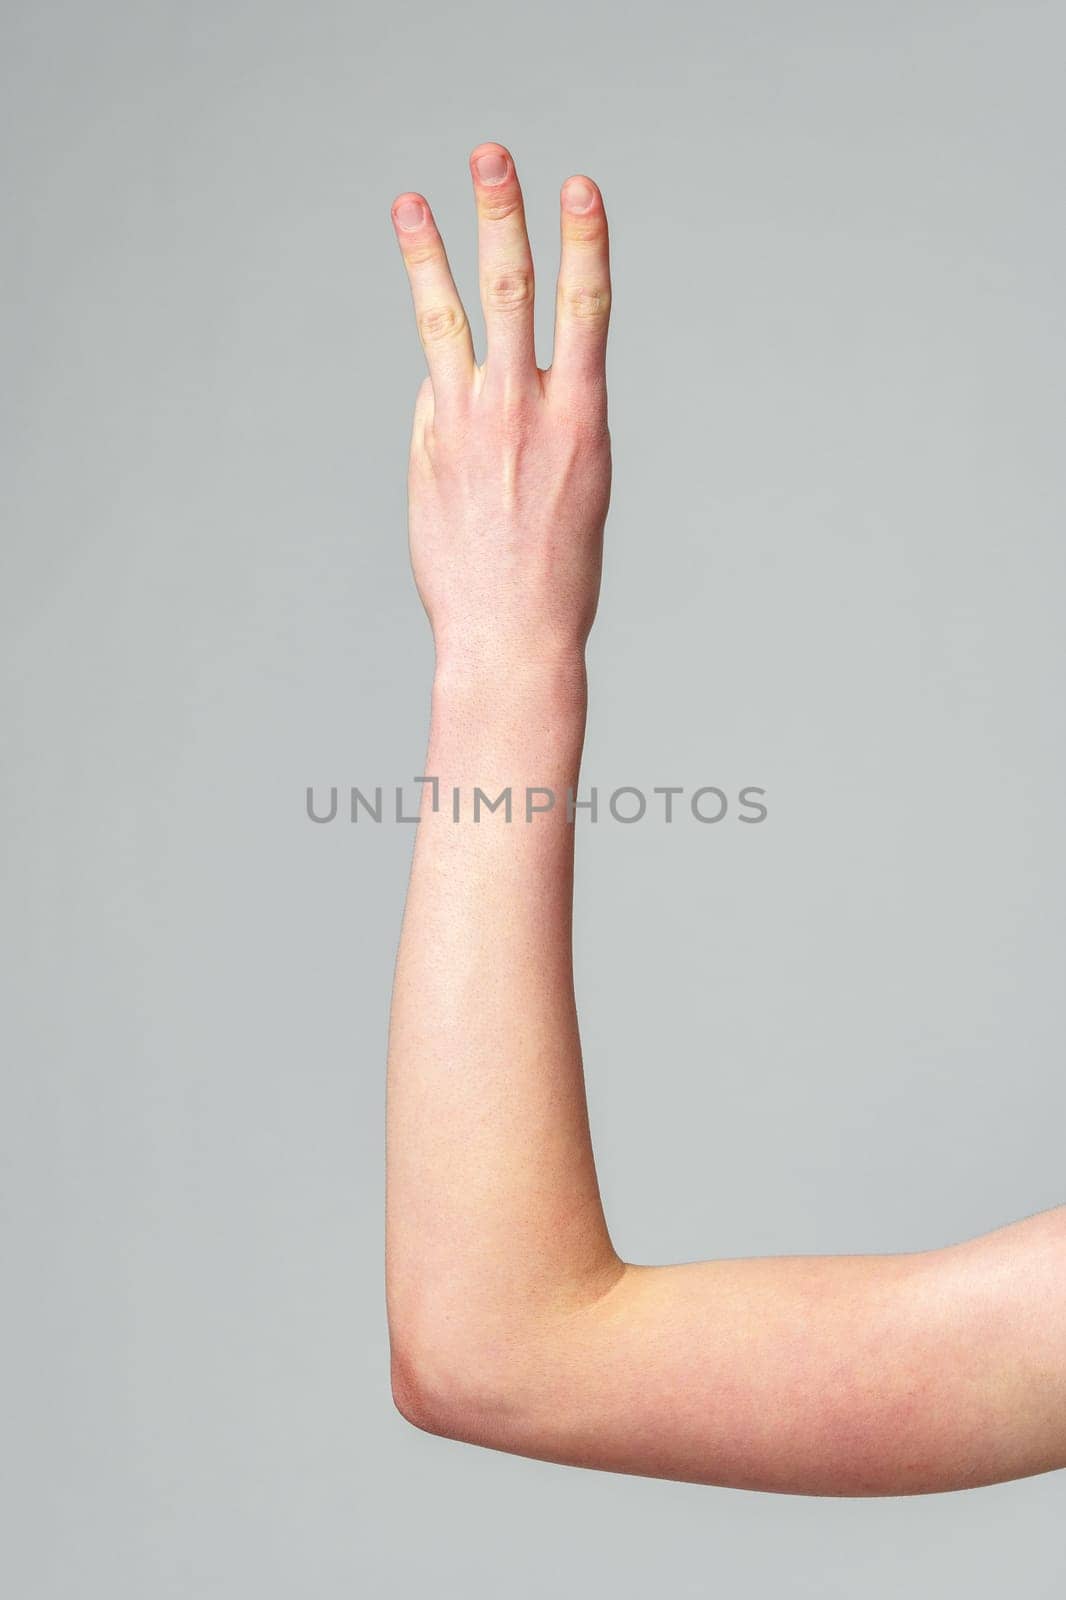 Human Hand Raised in a Gesture Against a Plain Grey Background by Fabrikasimf